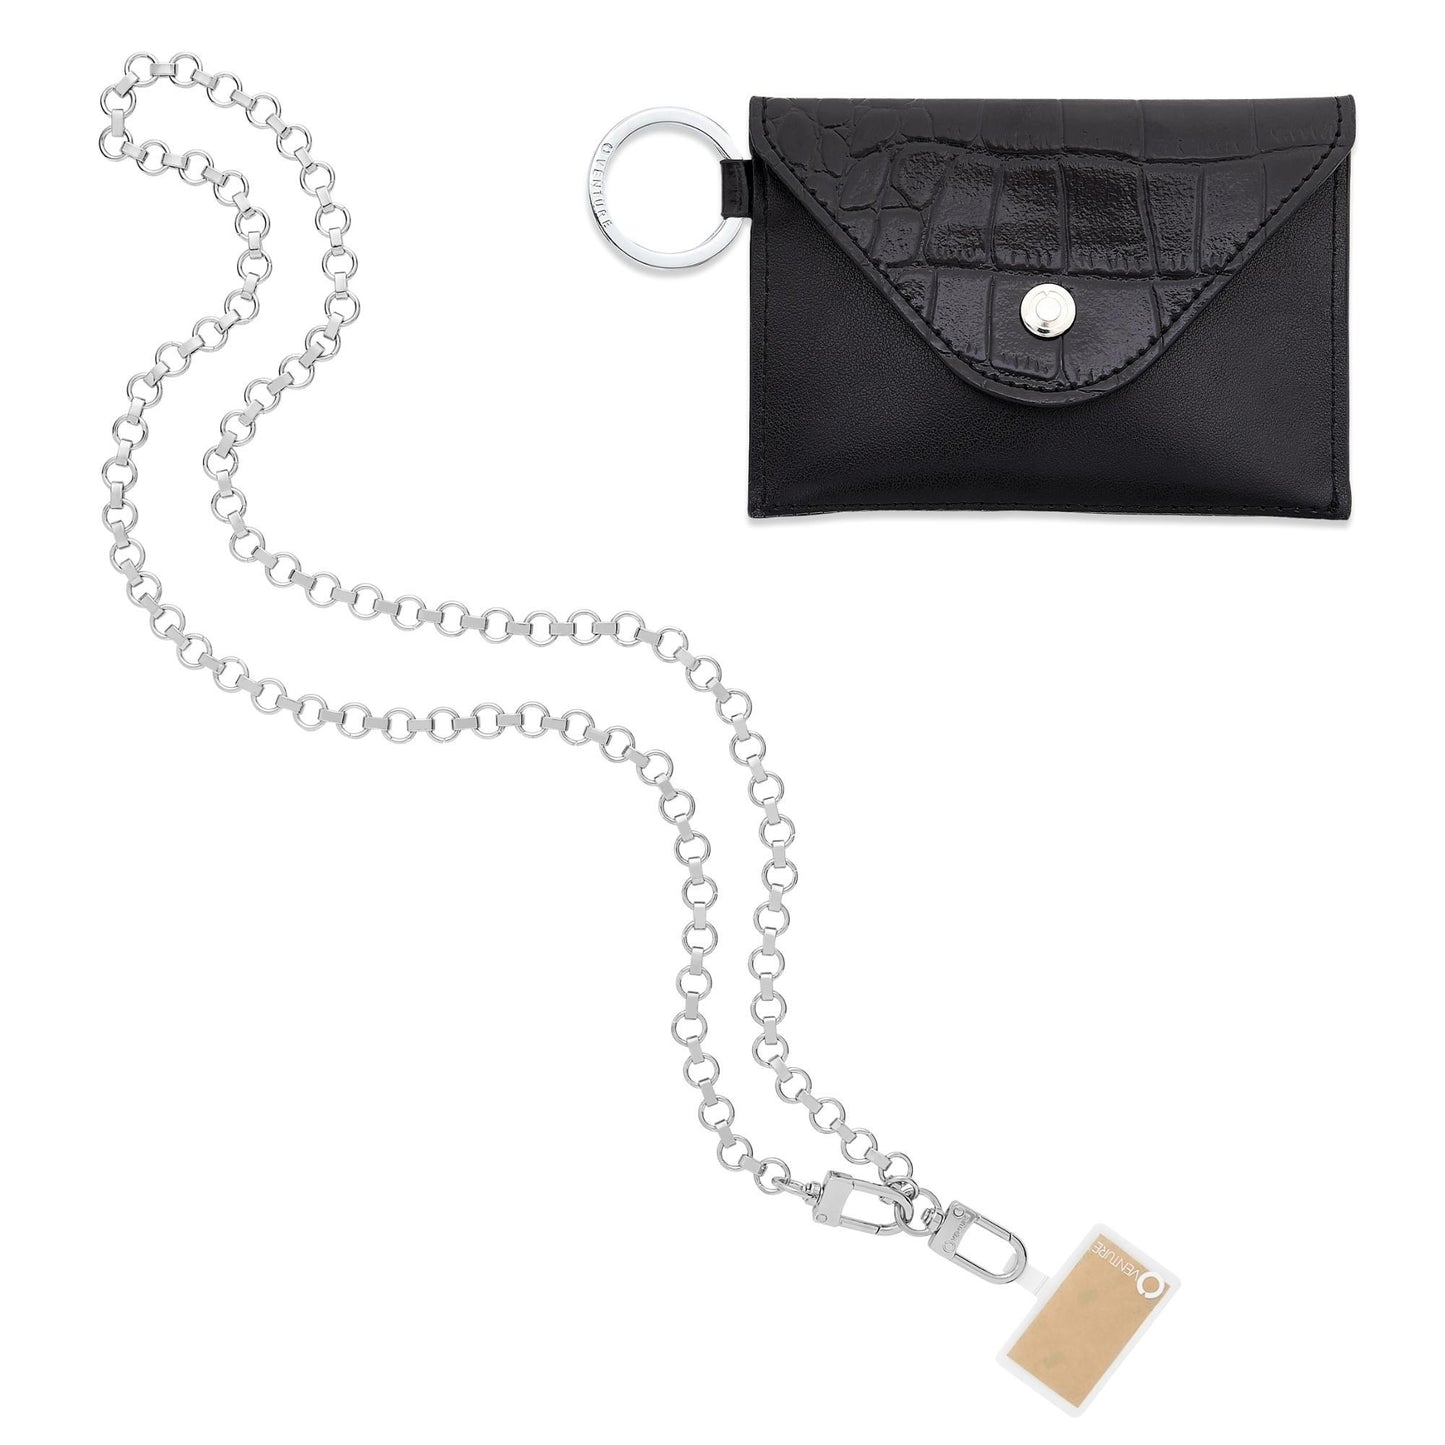 Black Crossbody Chain Set - Oventure this includes a mini envelope wallet in black embossed croc and a silver link crossbody chain and phone connector